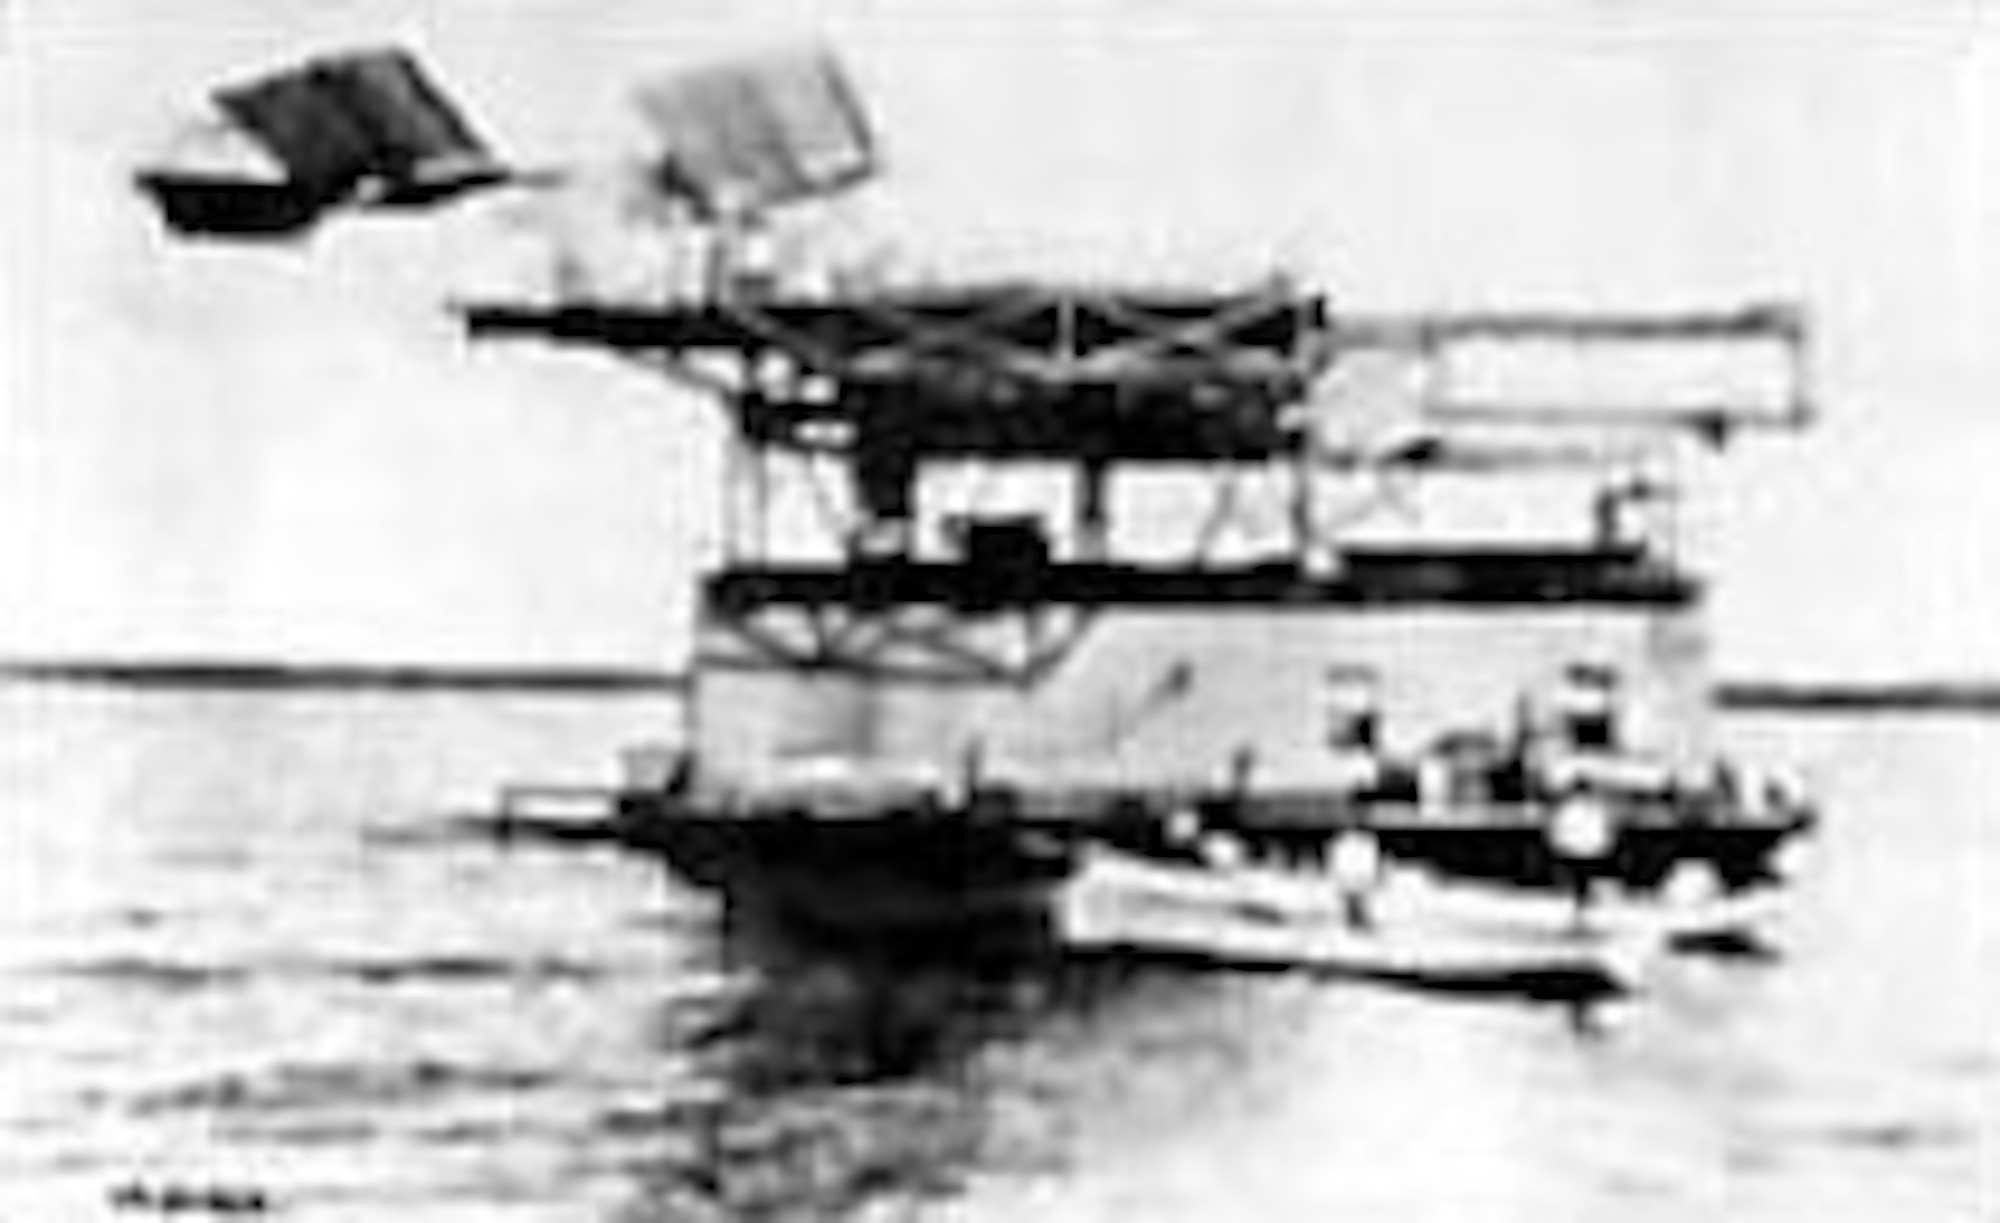 Charles M. Manly attempts to fly from the deck of a houseboat on the Potomac River. The flight was unsuccessful. (U.S. Air Force photo)